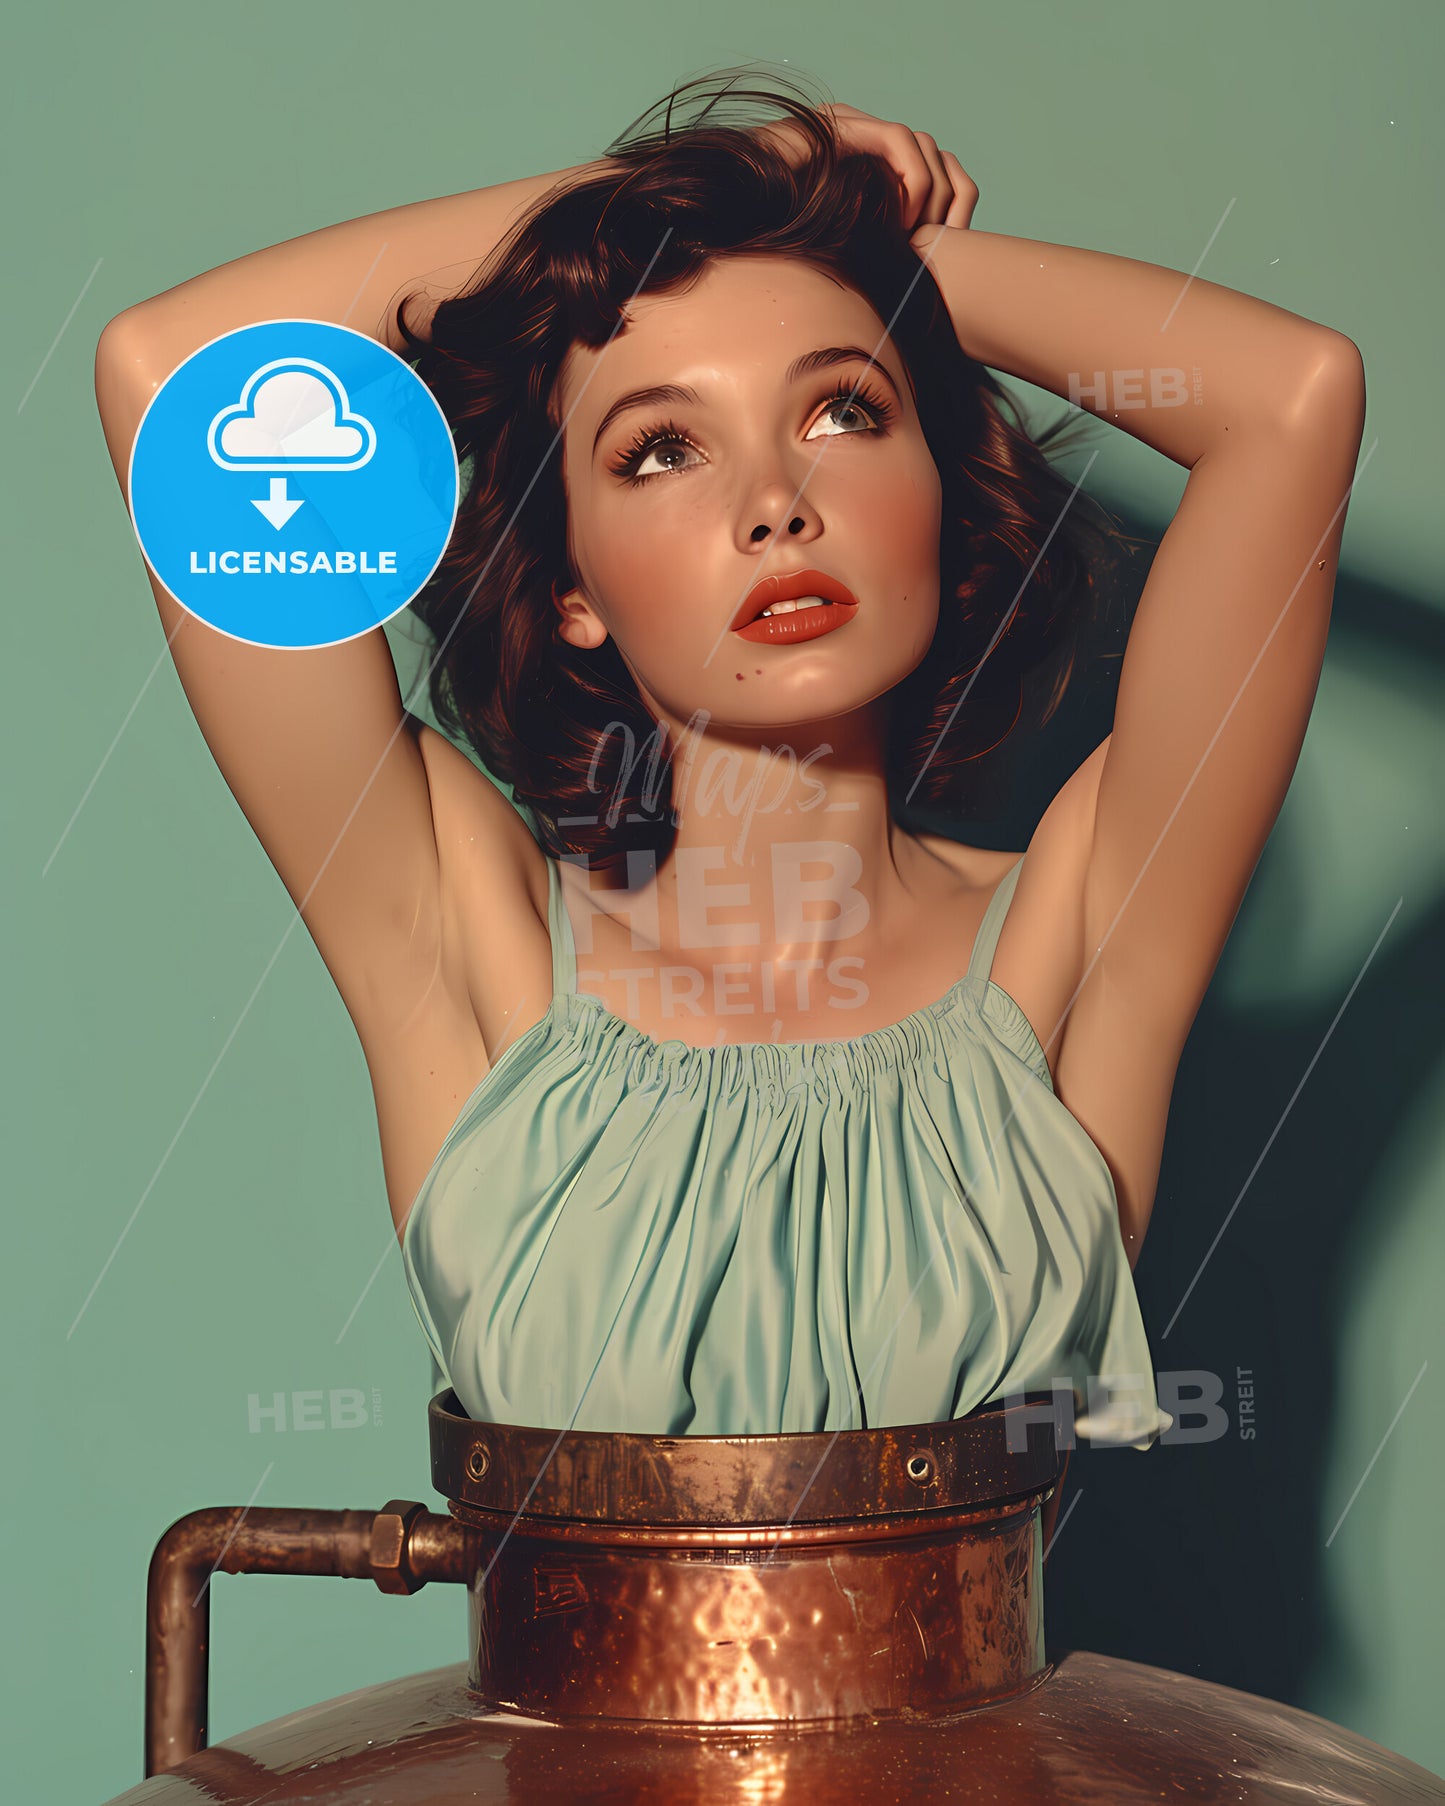 50S Pin Up Girl Sitting On Top Of A Copper Still Wearing A Short Halter Top And Denim Shorts - A Woman With Her Arms Behind Her Head